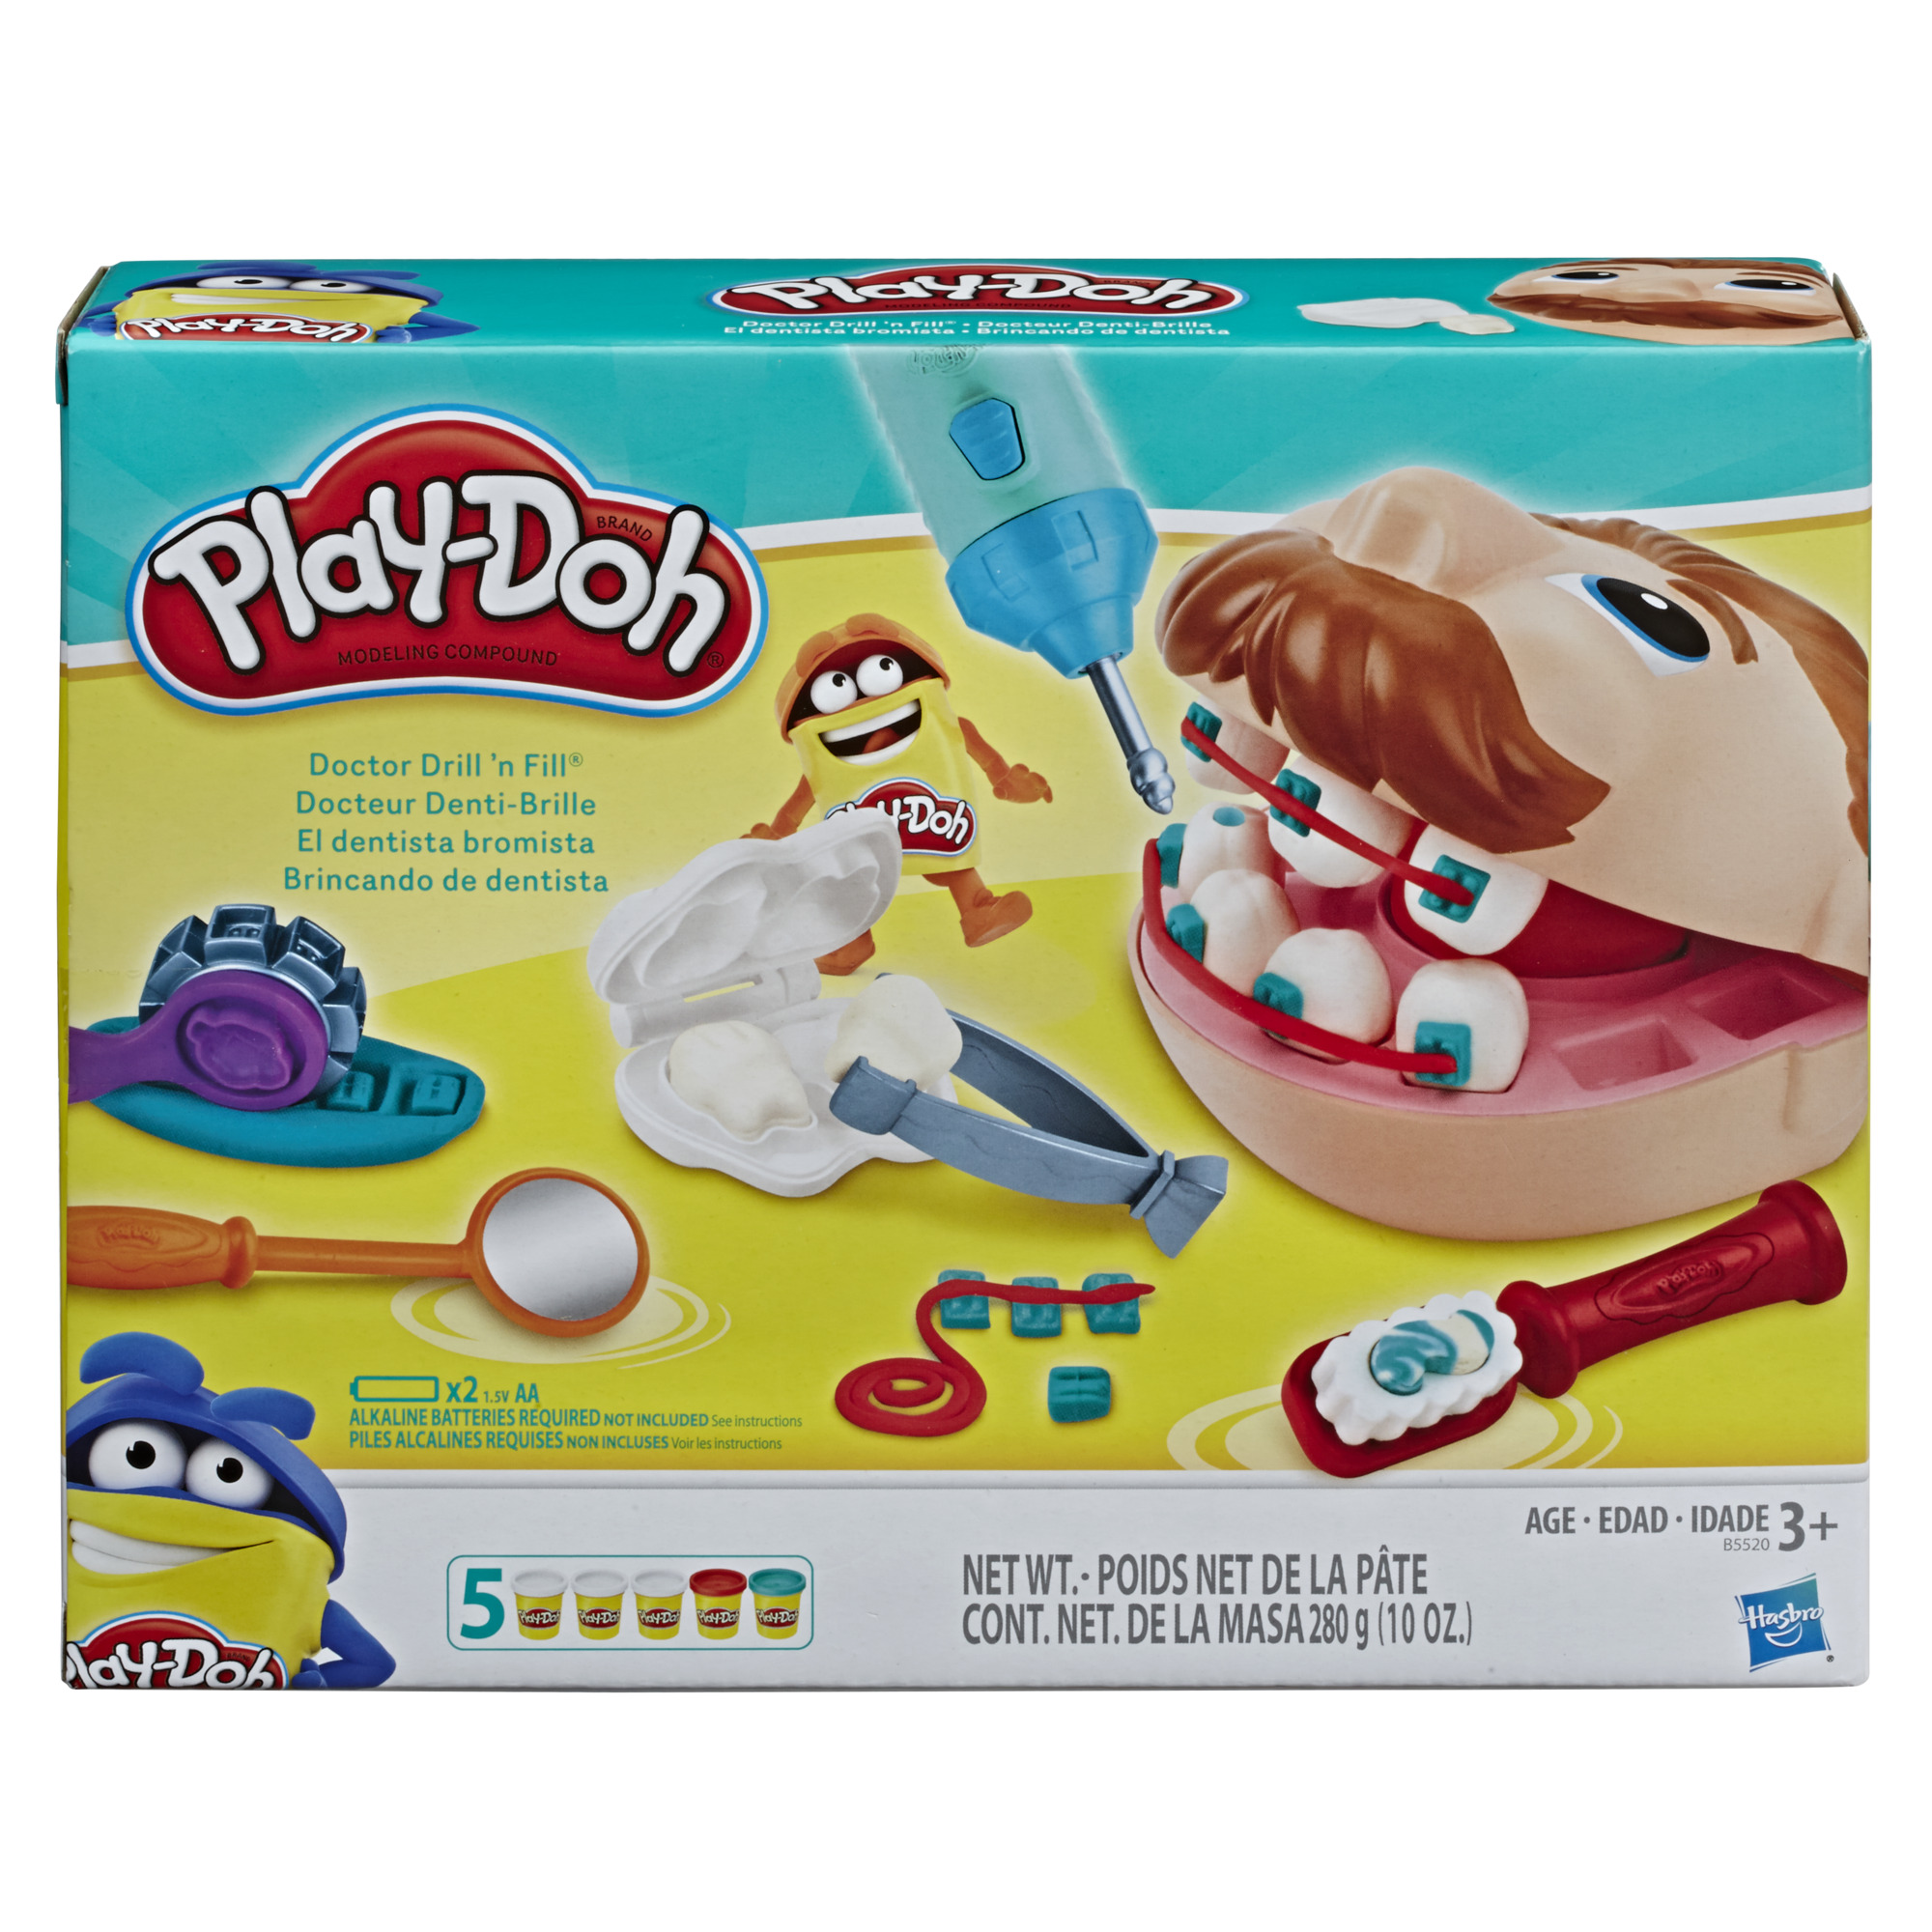 Play-Doh 6 Variety Texture Pack Scented Slime Kit For Boys and Girls - image 3 of 9